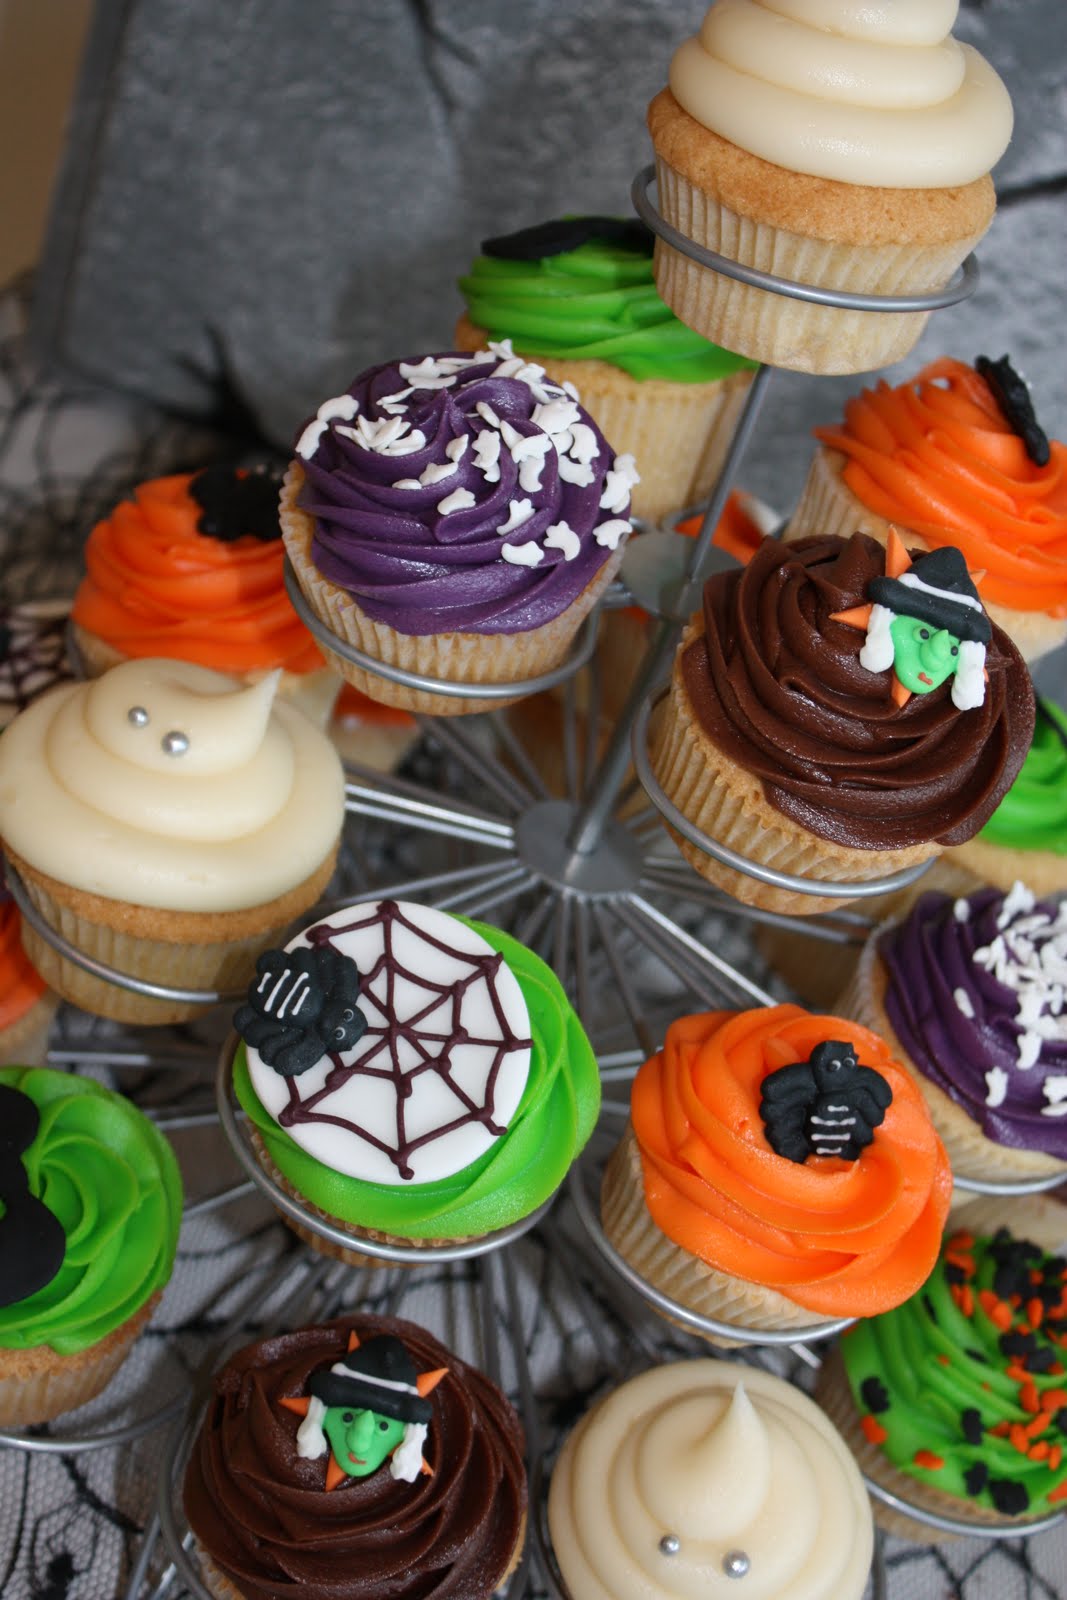 The Little House of Cupcakes: Halloween cupcakes!